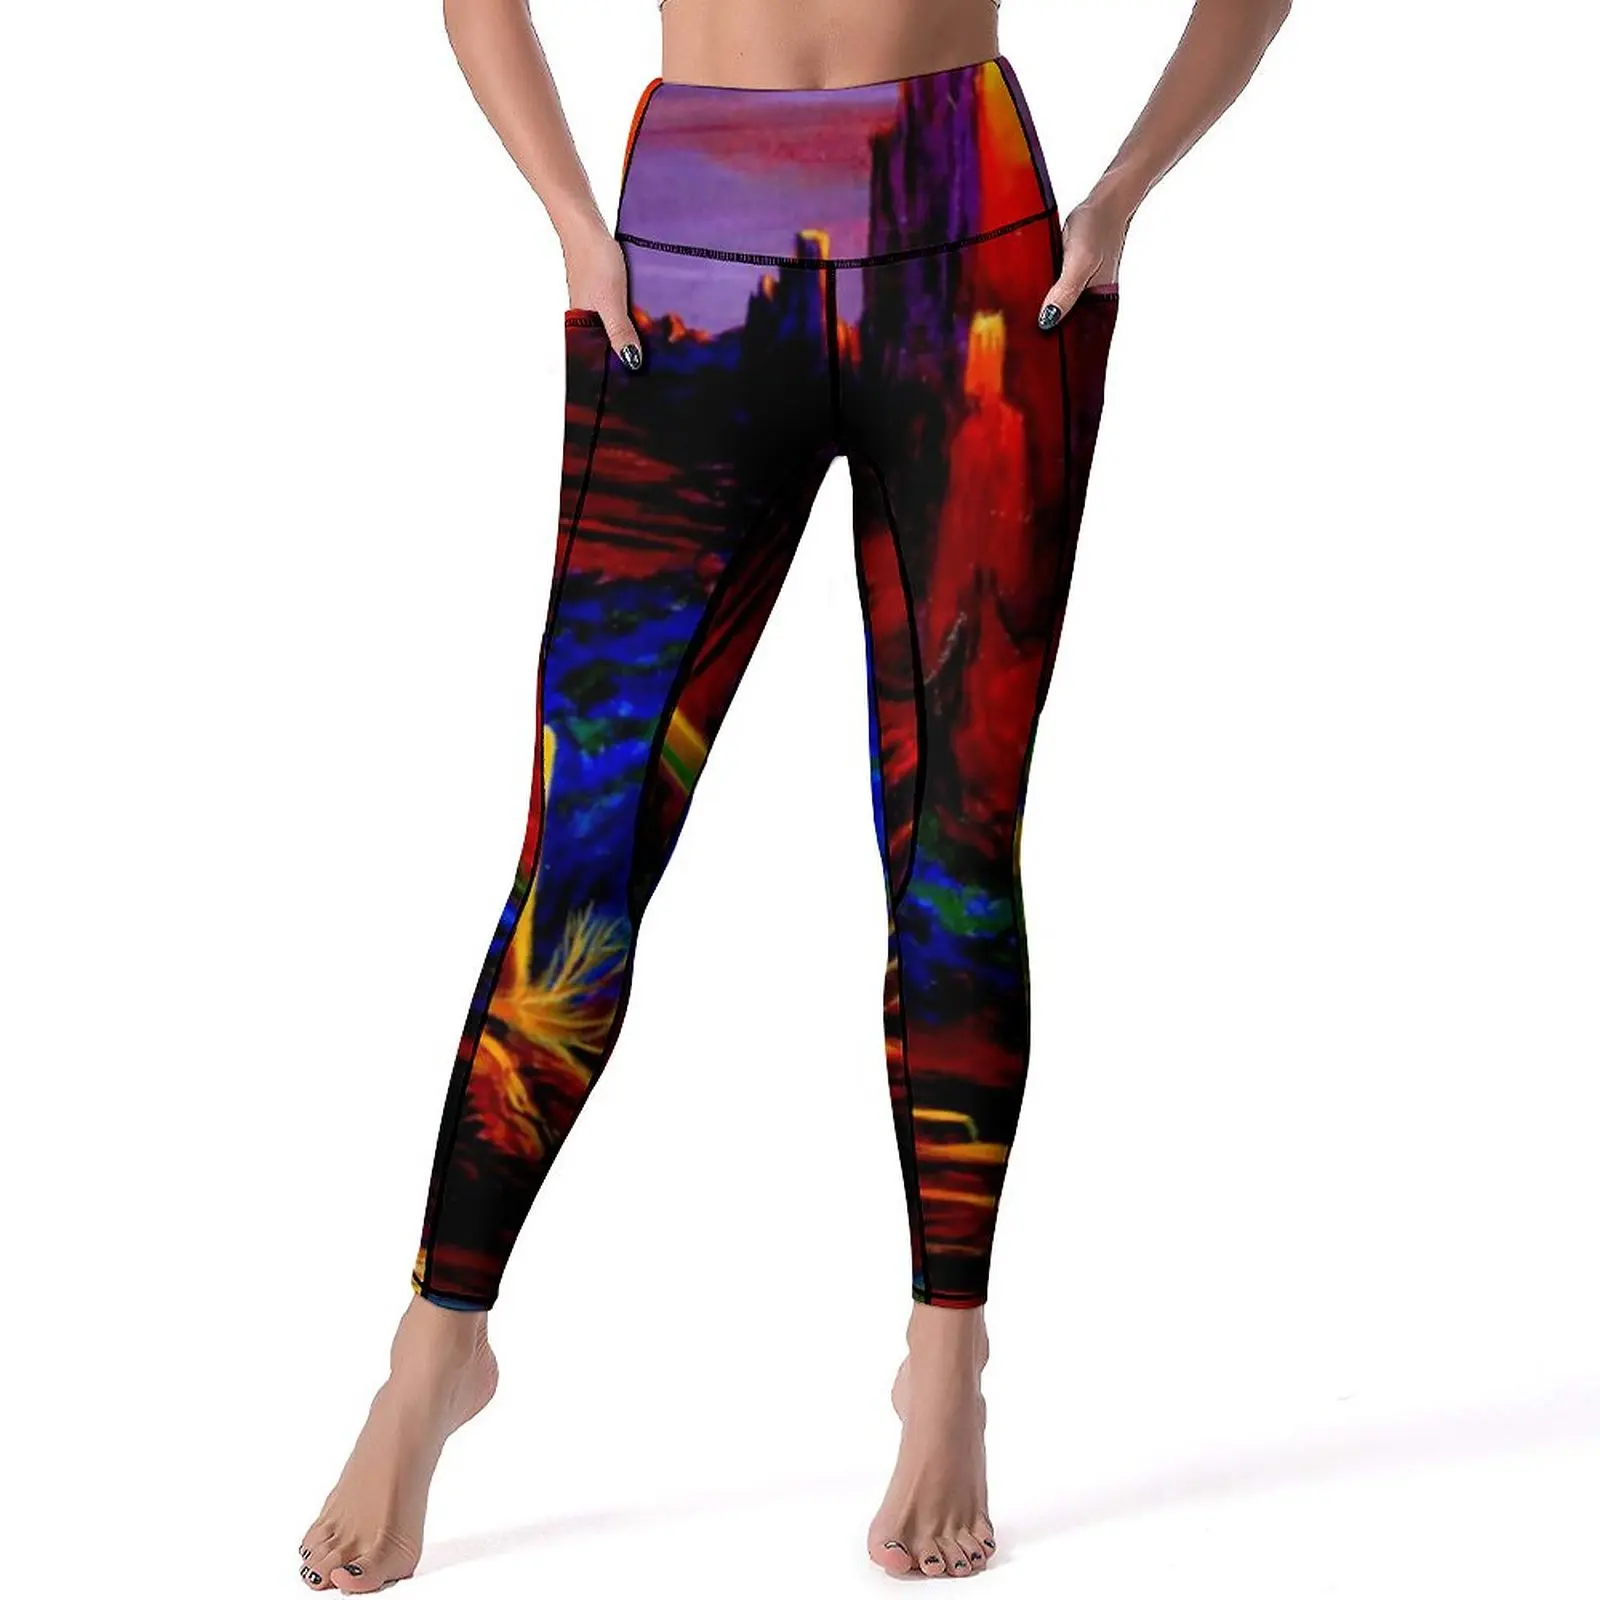 

Desert Painted Yoga Pants Sexy Mountains Sunset Print Graphic Leggings High Waist Gym Leggins Lady Fashion Stretch Sports Tights